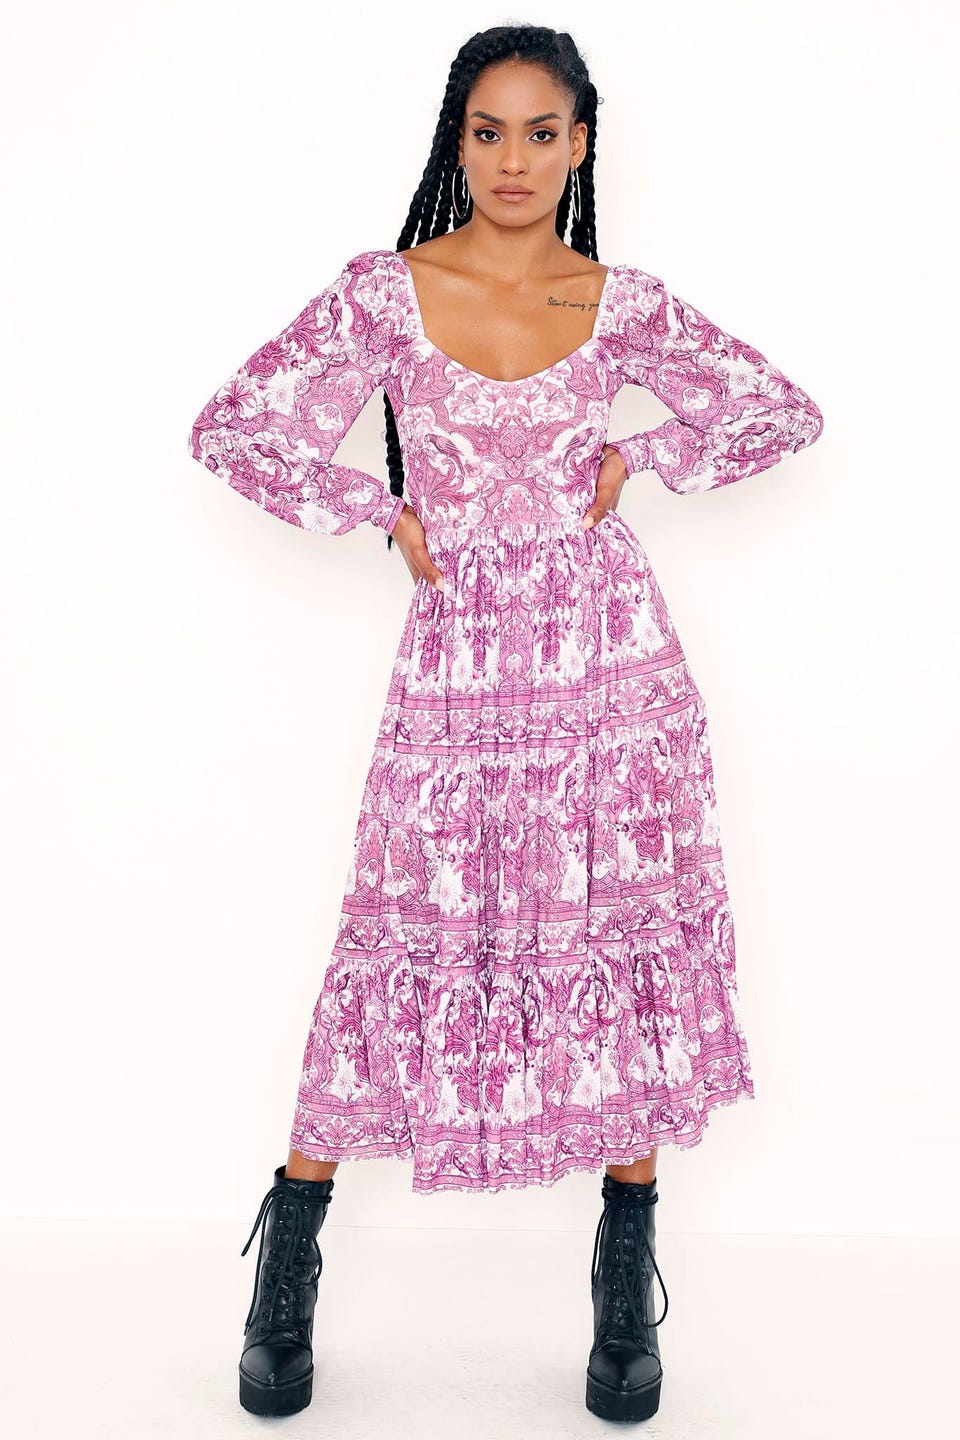 Chinoiserie Magenta Tier Romance Dress - Limited